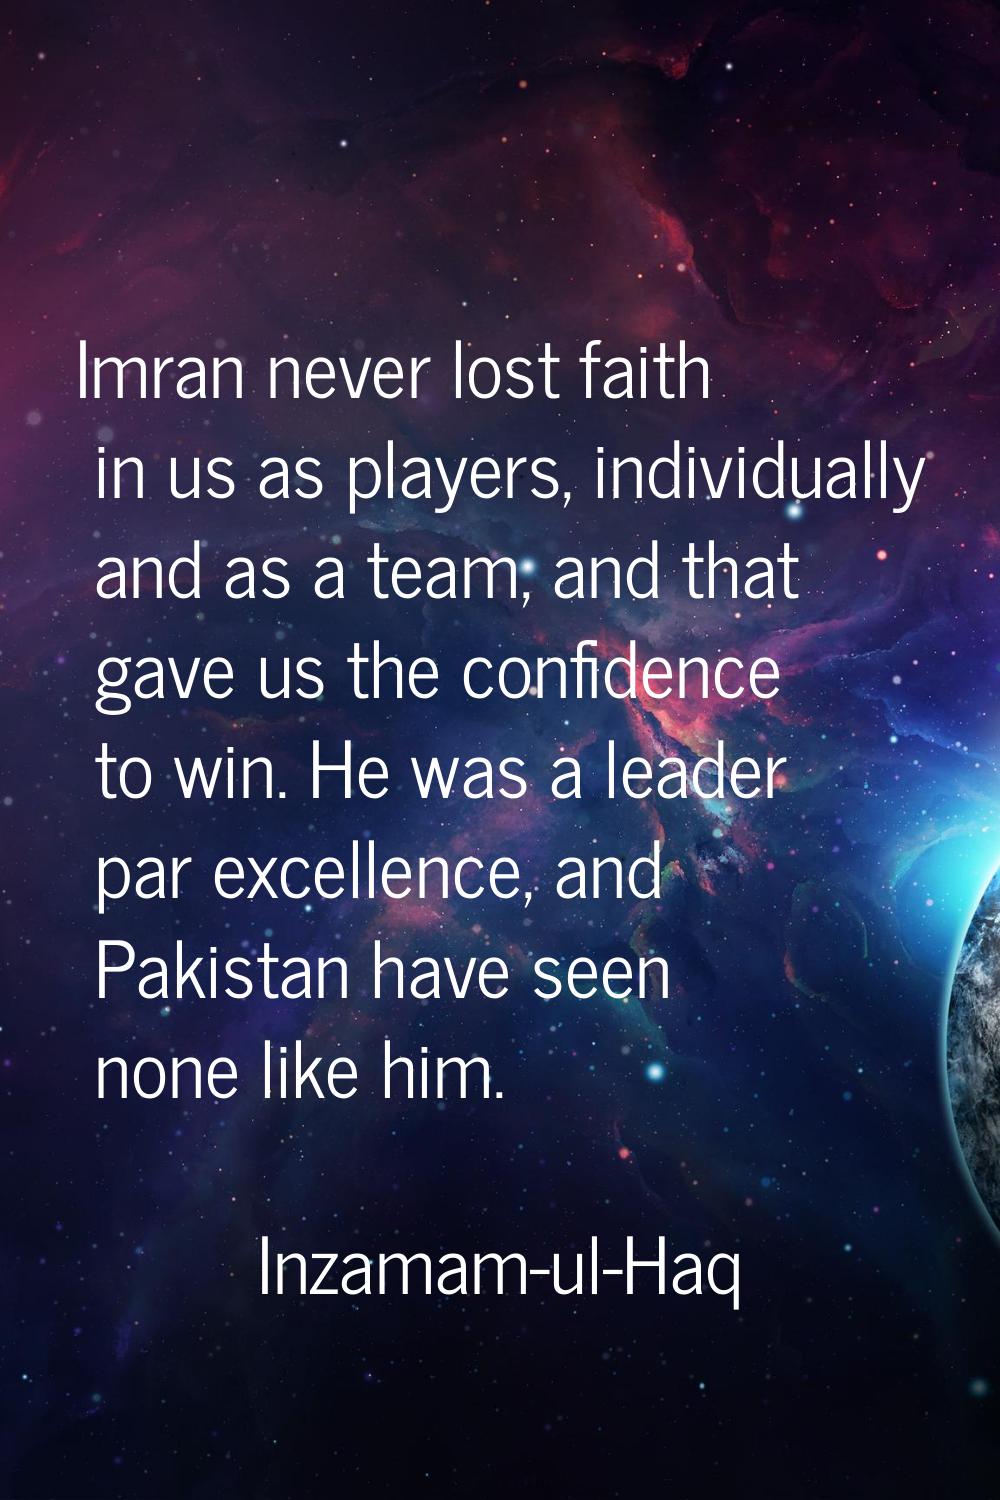 Imran never lost faith in us as players, individually and as a team, and that gave us the confidenc